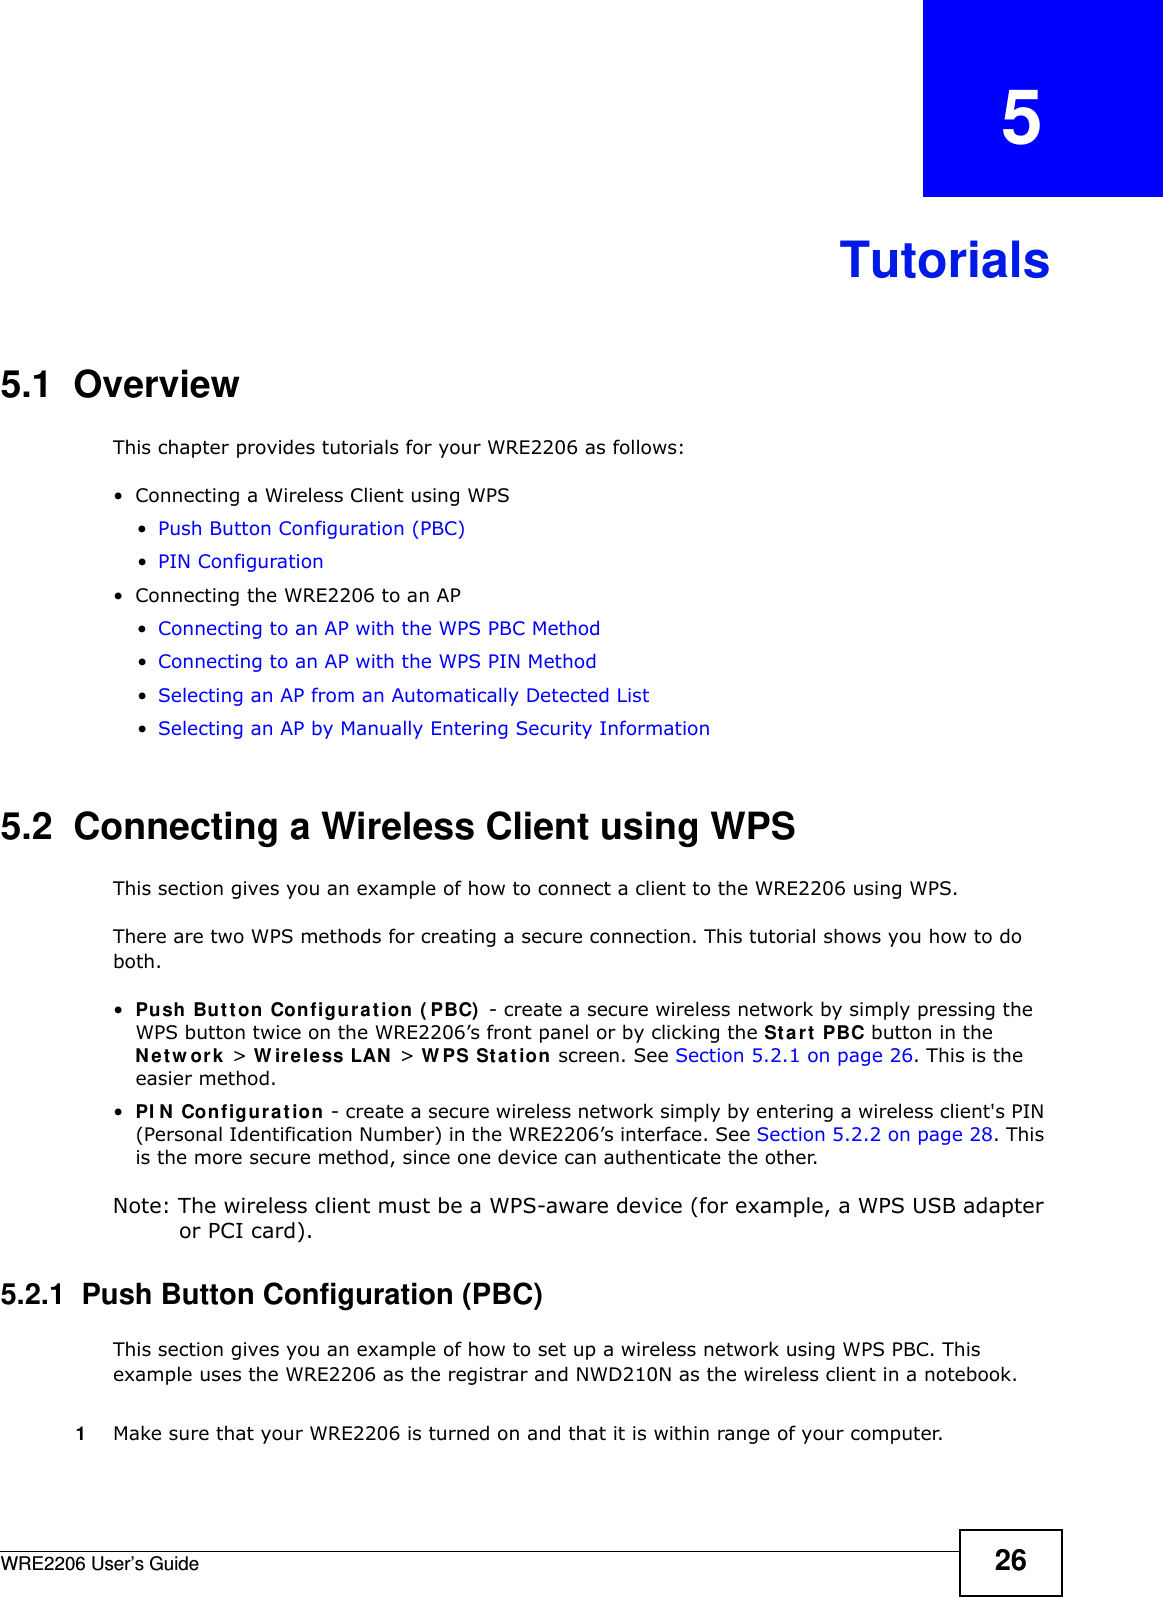 WRE2206 User’s Guide 26CHAPTER   5Tutorials5.1  OverviewThis chapter provides tutorials for your WRE2206 as follows:• Connecting a Wireless Client using WPS•Push Button Configuration (PBC)•PIN Configuration• Connecting the WRE2206 to an AP•Connecting to an AP with the WPS PBC Method•Connecting to an AP with the WPS PIN Method•Selecting an AP from an Automatically Detected List•Selecting an AP by Manually Entering Security Information5.2  Connecting a Wireless Client using WPSThis section gives you an example of how to connect a client to the WRE2206 using WPS.There are two WPS methods for creating a secure connection. This tutorial shows you how to do both.•Push But t on Configur a t ion  ( PBC)  - create a secure wireless network by simply pressing the WPS button twice on the WRE2206’s front panel or by clicking the Star t  PBC button in the N e t w or k  &gt; W ire le ss LAN  &gt; W PS St a t ion  screen. See Section 5.2.1 on page 26. This is the easier method.•PI N  Configurat ion - create a secure wireless network simply by entering a wireless client&apos;s PIN (Personal Identification Number) in the WRE2206’s interface. See Section 5.2.2 on page 28. This is the more secure method, since one device can authenticate the other.Note: The wireless client must be a WPS-aware device (for example, a WPS USB adapter or PCI card).5.2.1  Push Button Configuration (PBC)This section gives you an example of how to set up a wireless network using WPS PBC. This example uses the WRE2206 as the registrar and NWD210N as the wireless client in a notebook.1Make sure that your WRE2206 is turned on and that it is within range of your computer. 